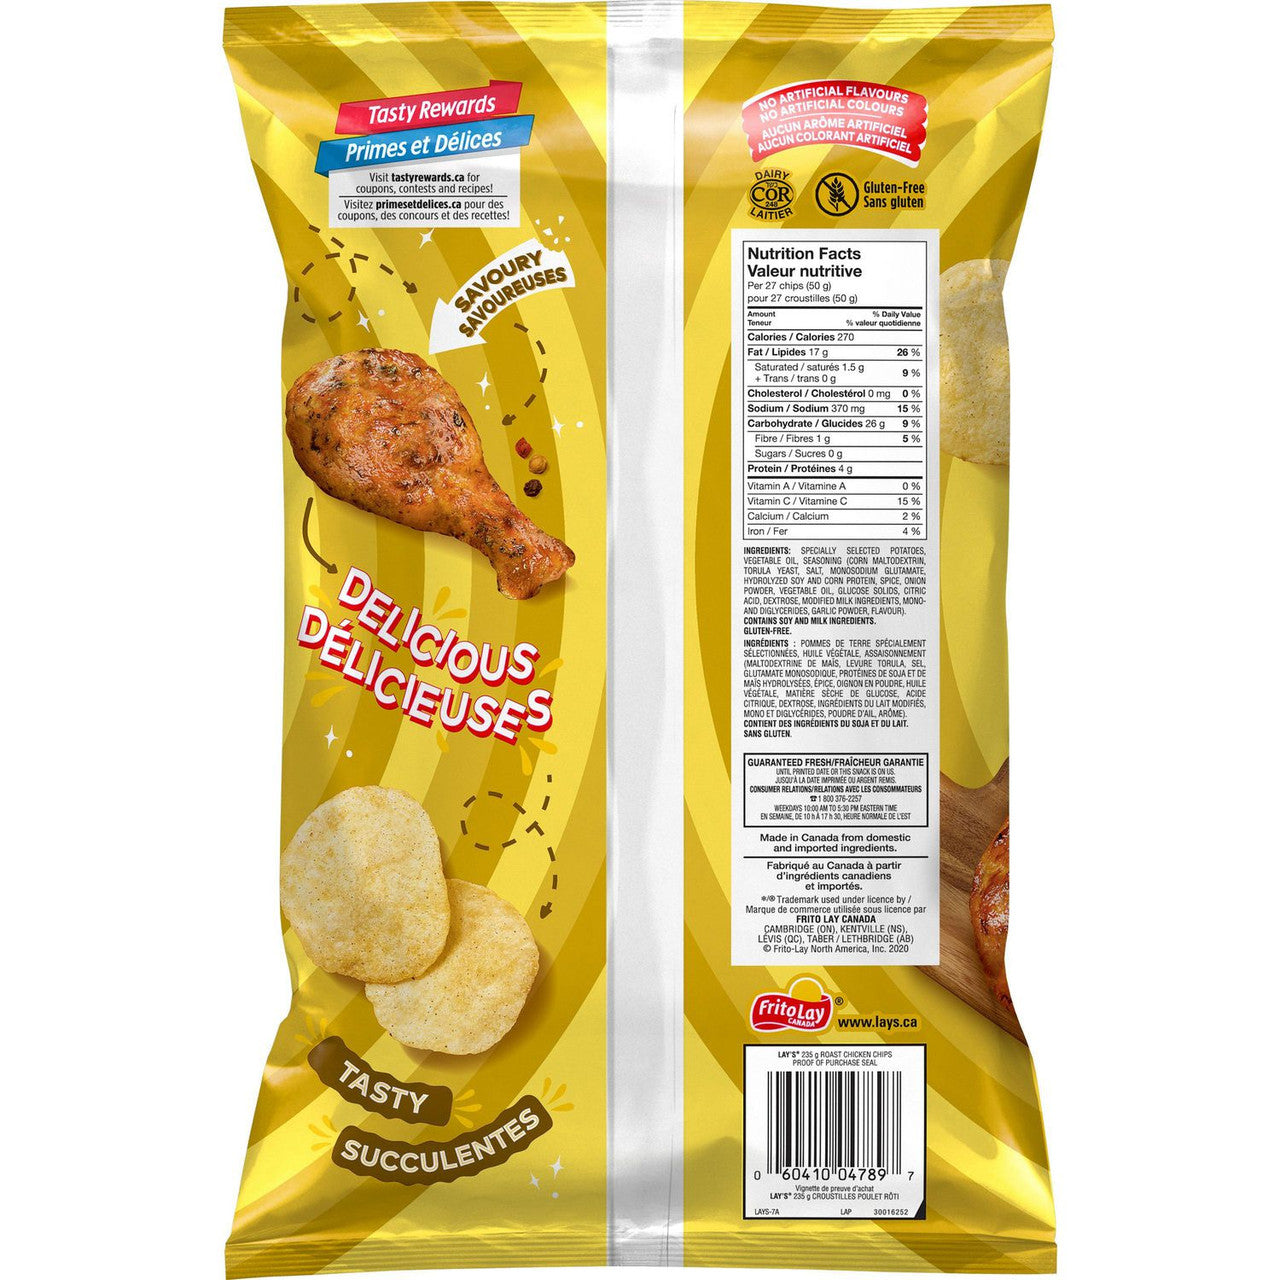 Lay's Potato Chips Roast Chicken Flavored Chips 66g/2.3 oz., Bag {Imported from Canada}